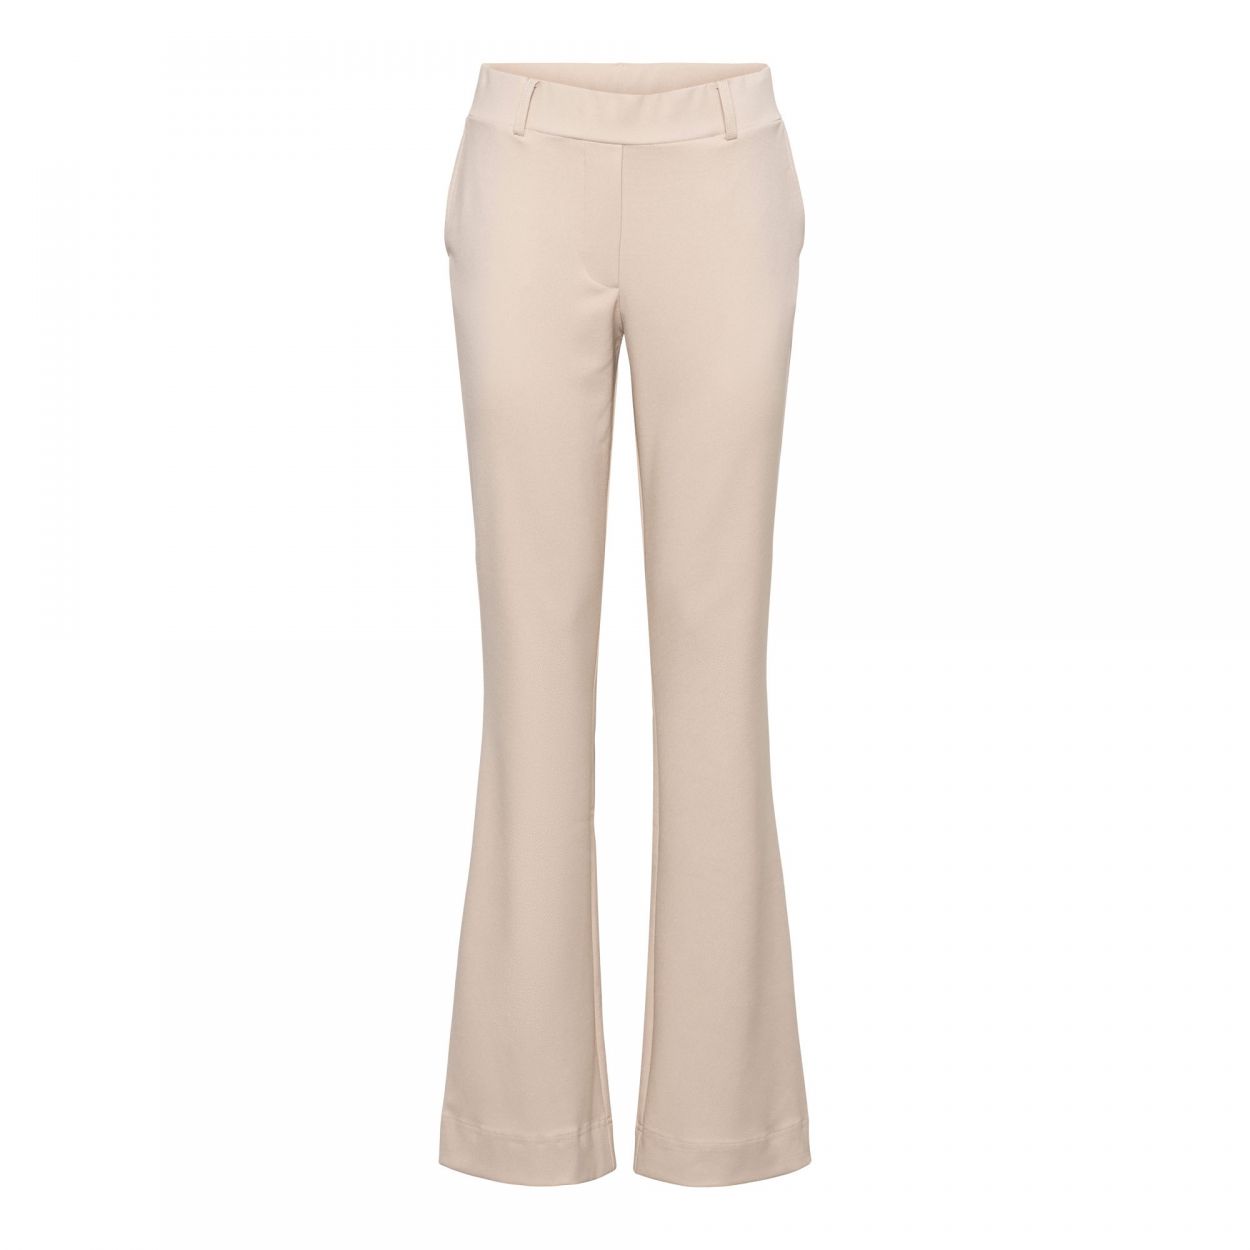 &Co Woman CHARLIE COMFORT TWILL 41040 z-sand 2900144969073